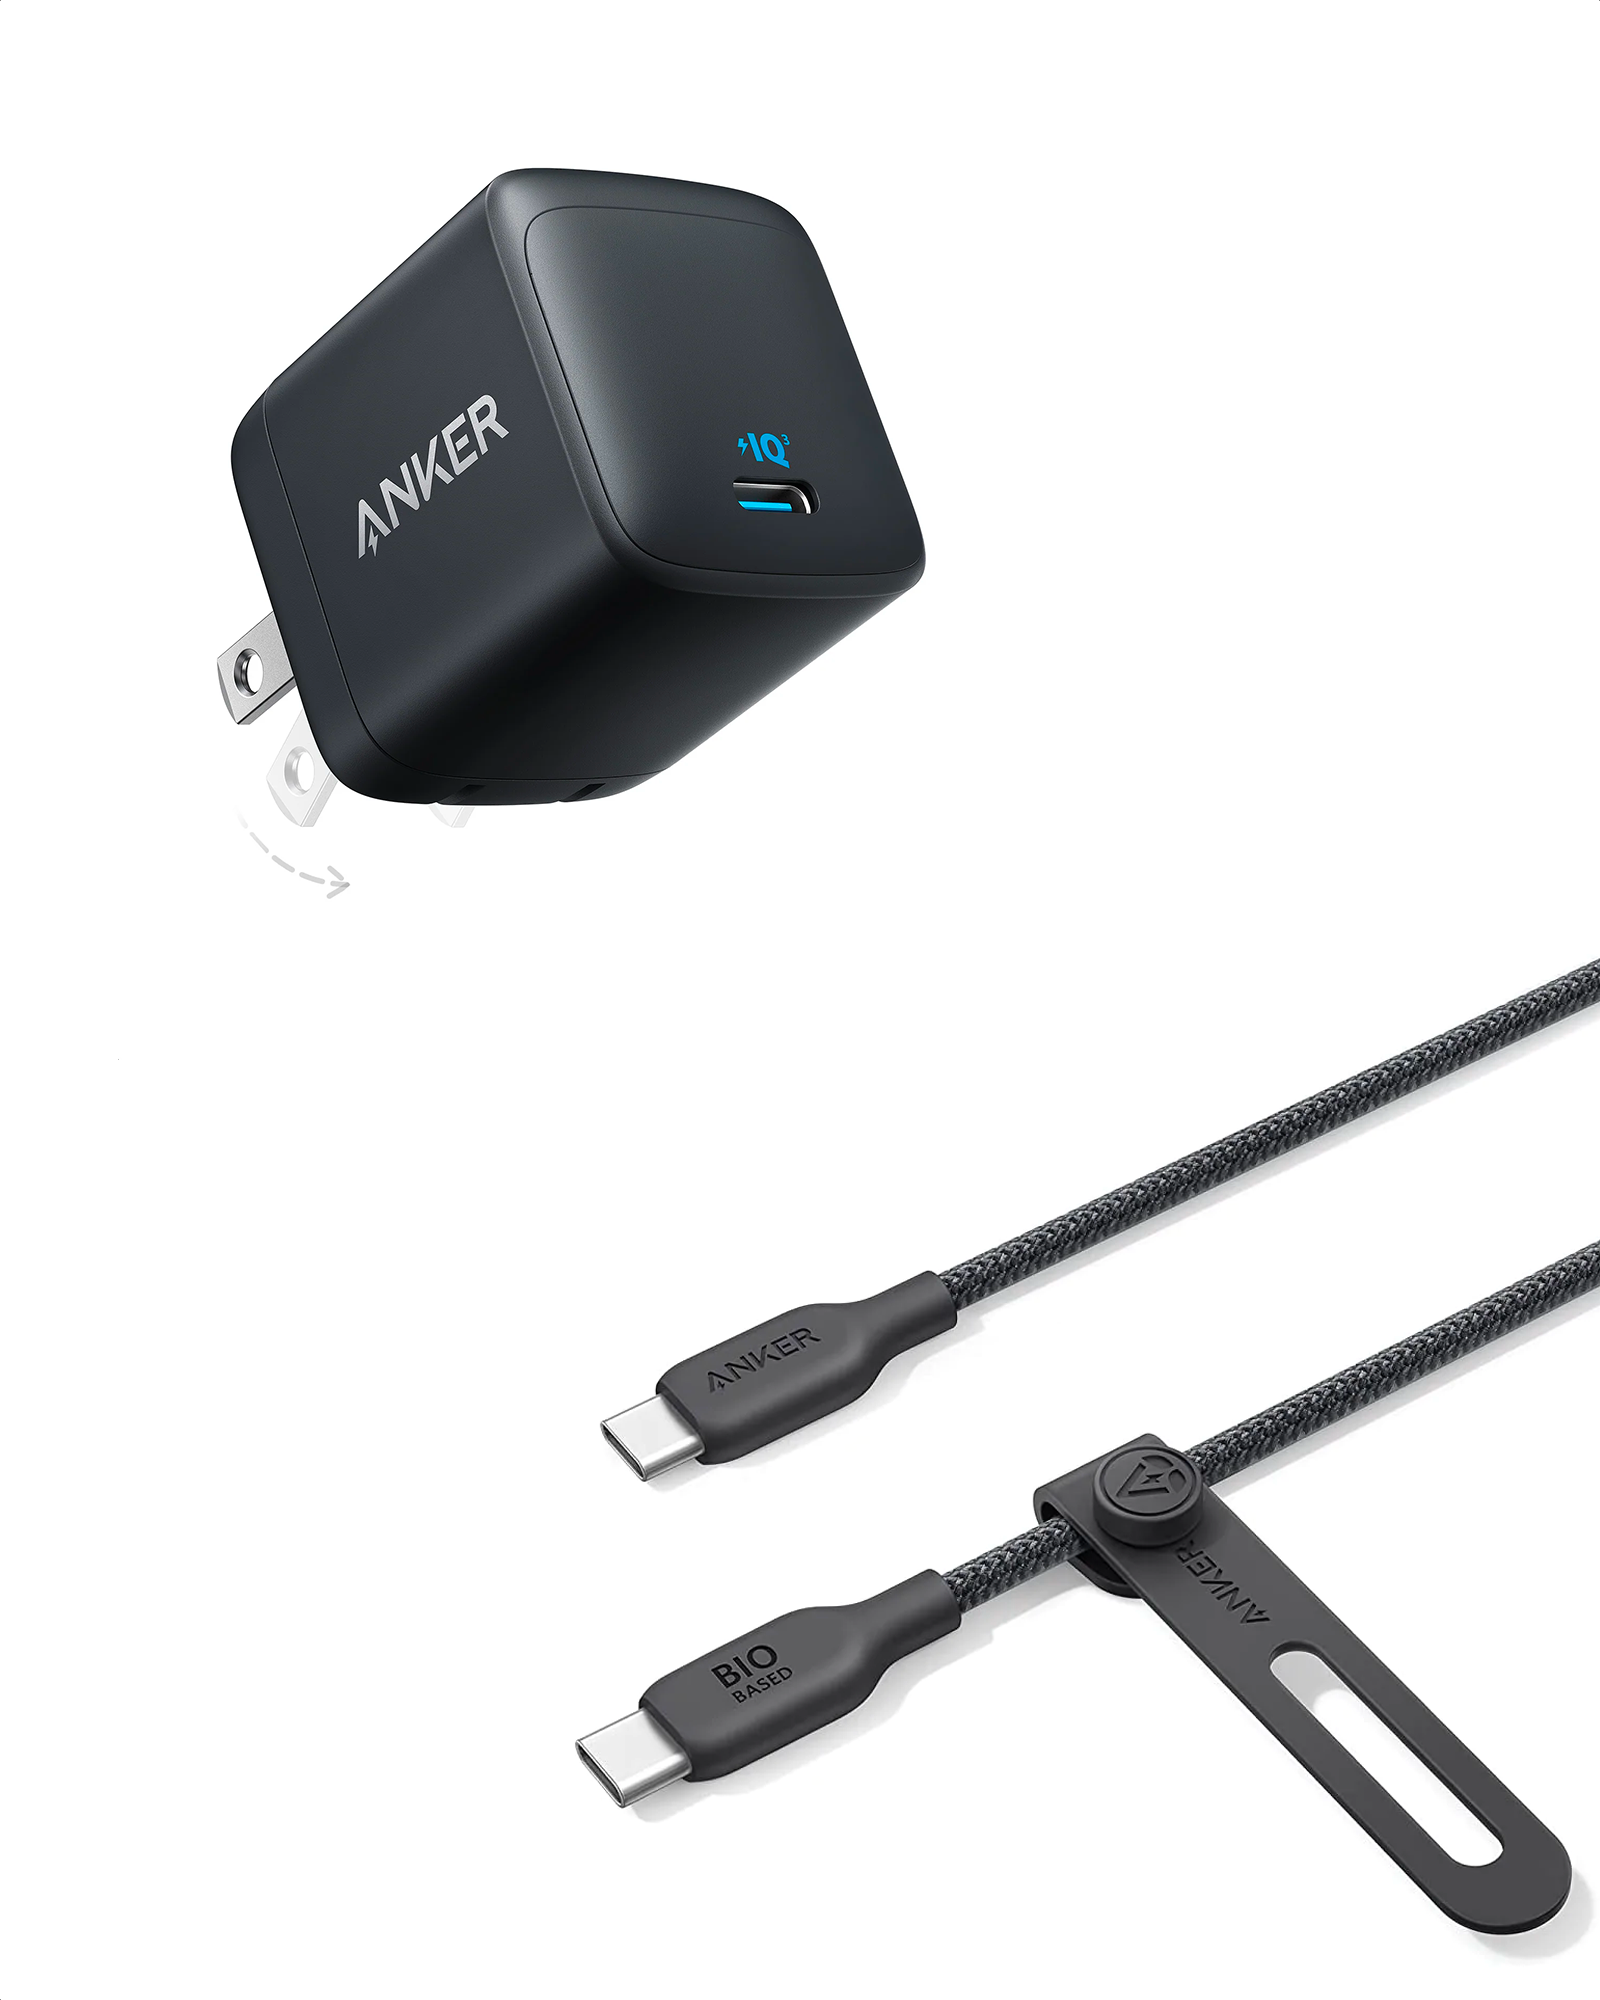 Anker 313 Charger (Ace, 45W) - Anker US